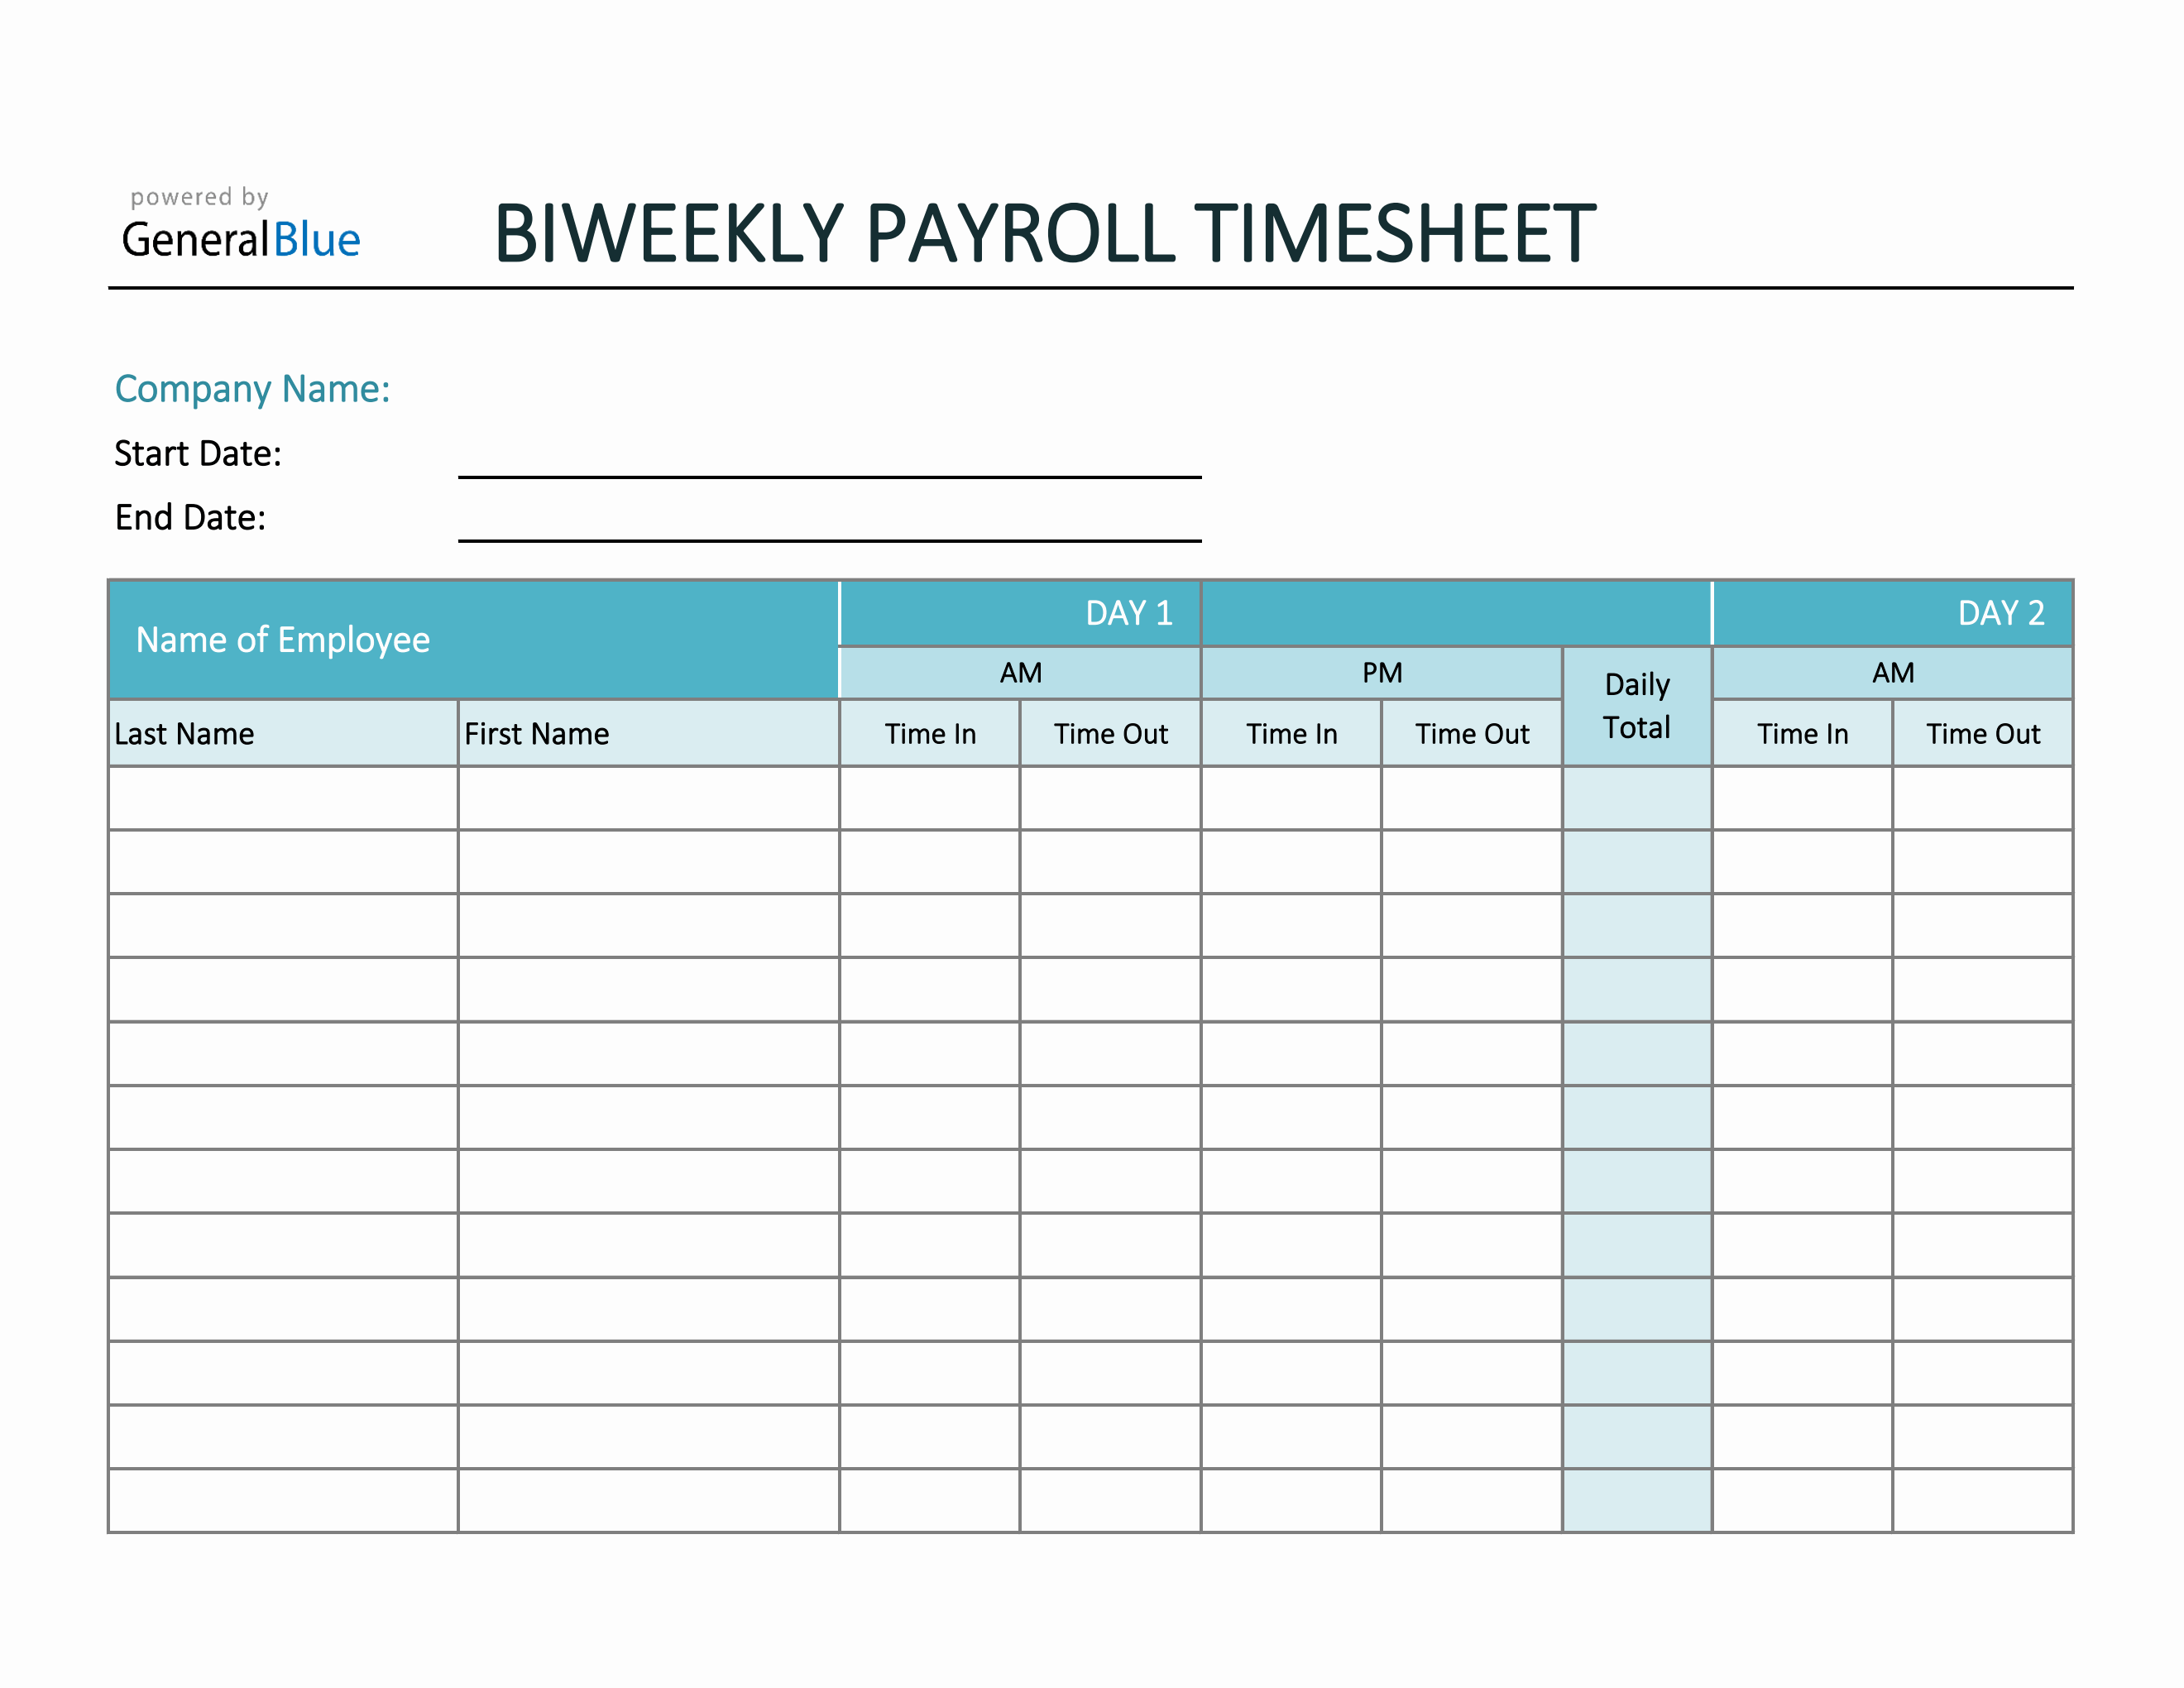 excel-biweekly-payroll-timesheet-for-multiple-employees